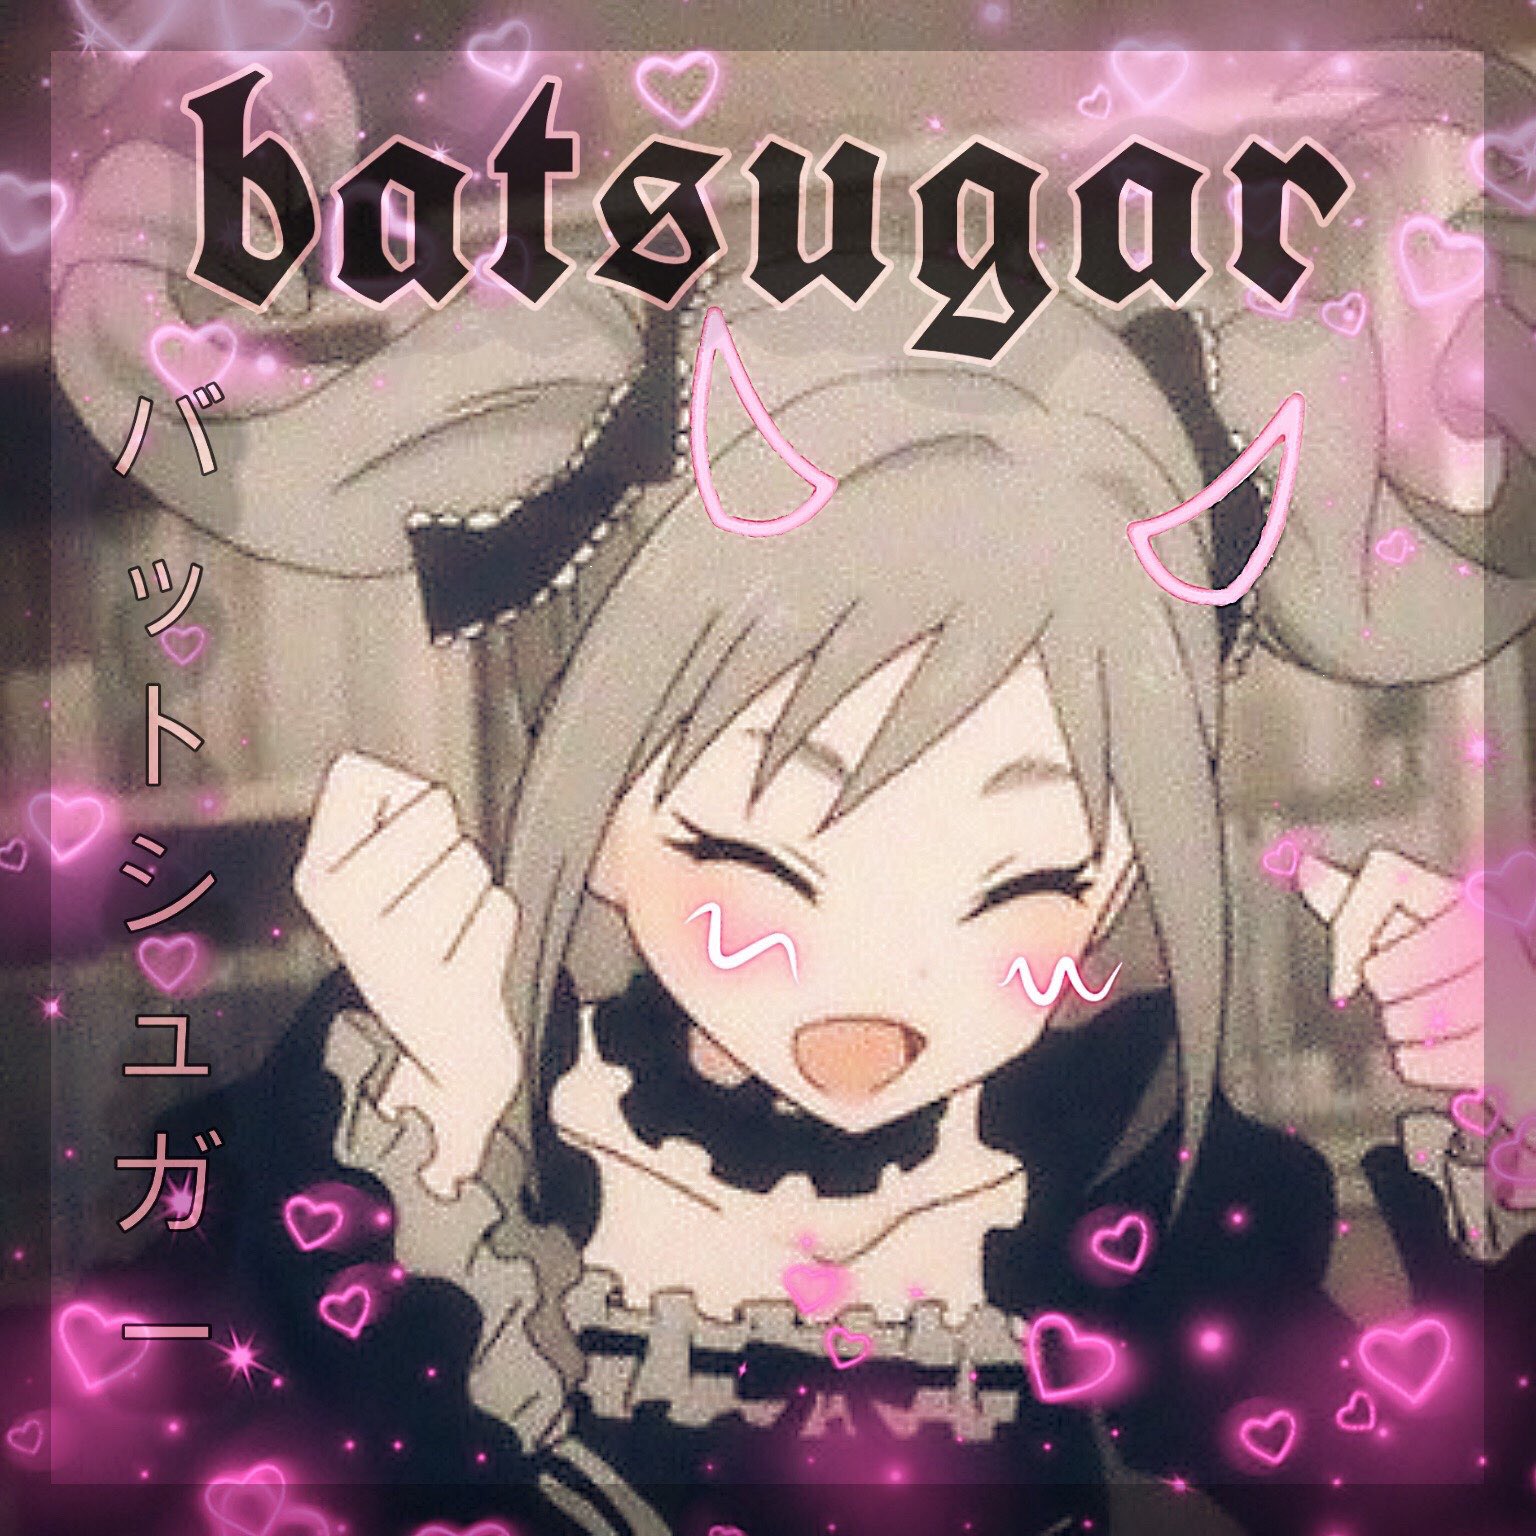 HTAO on X: I made new roblox group icons for batsugar and ERIEN! 🦇🌸  Currently looking for group allies w similar clothing :) #roblox #robloxdev  #robloxdesigner #edits #aesthetic  / X